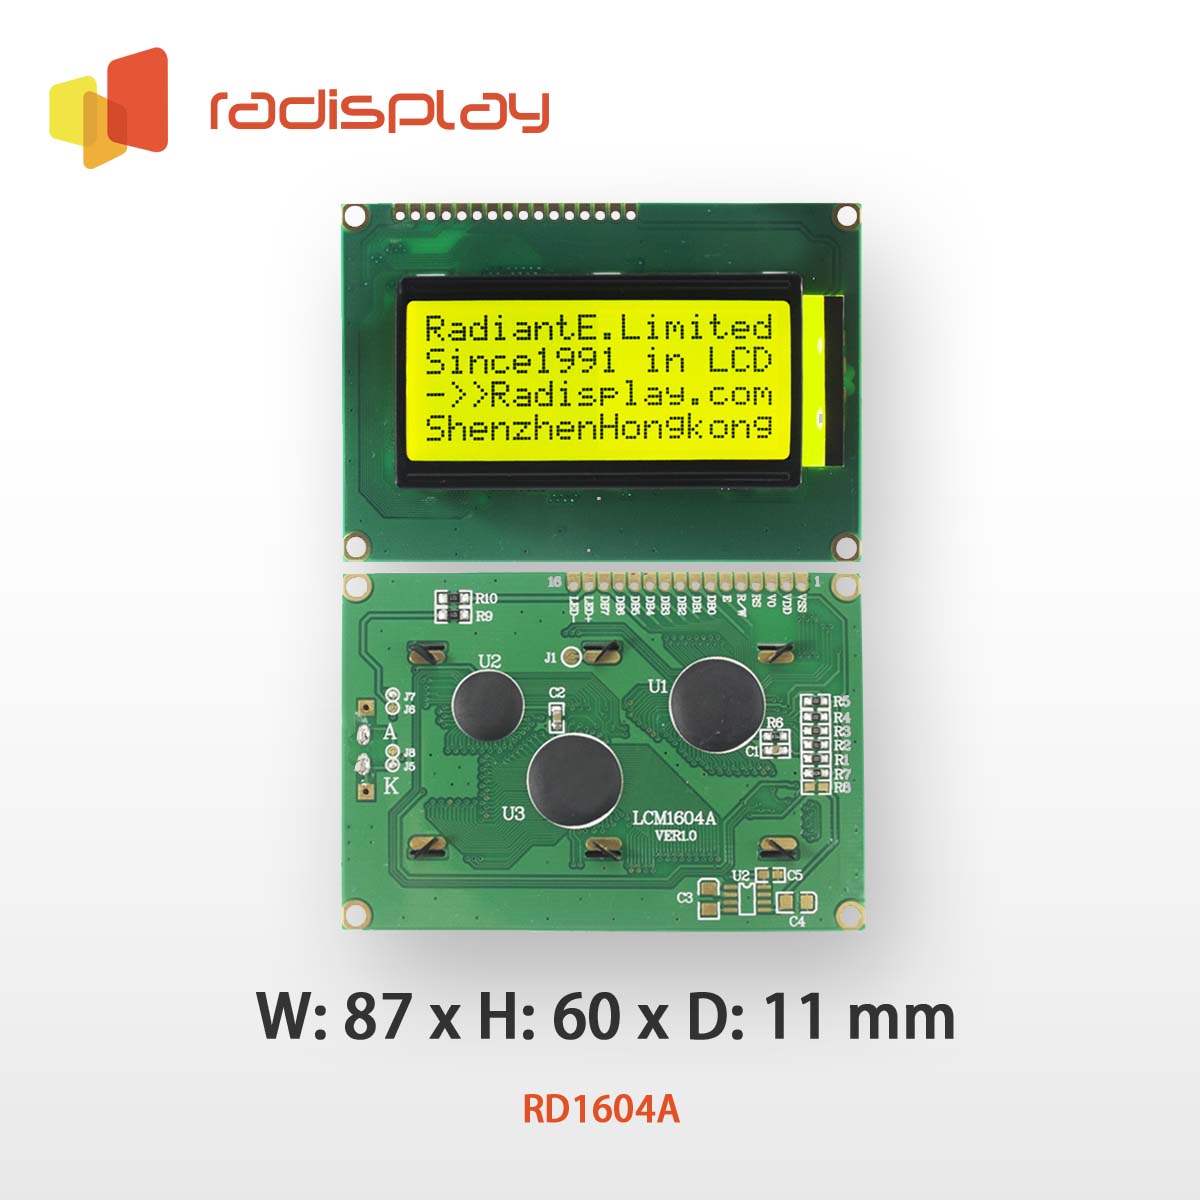 16x4 Character LCD Display Module (RD1604A)